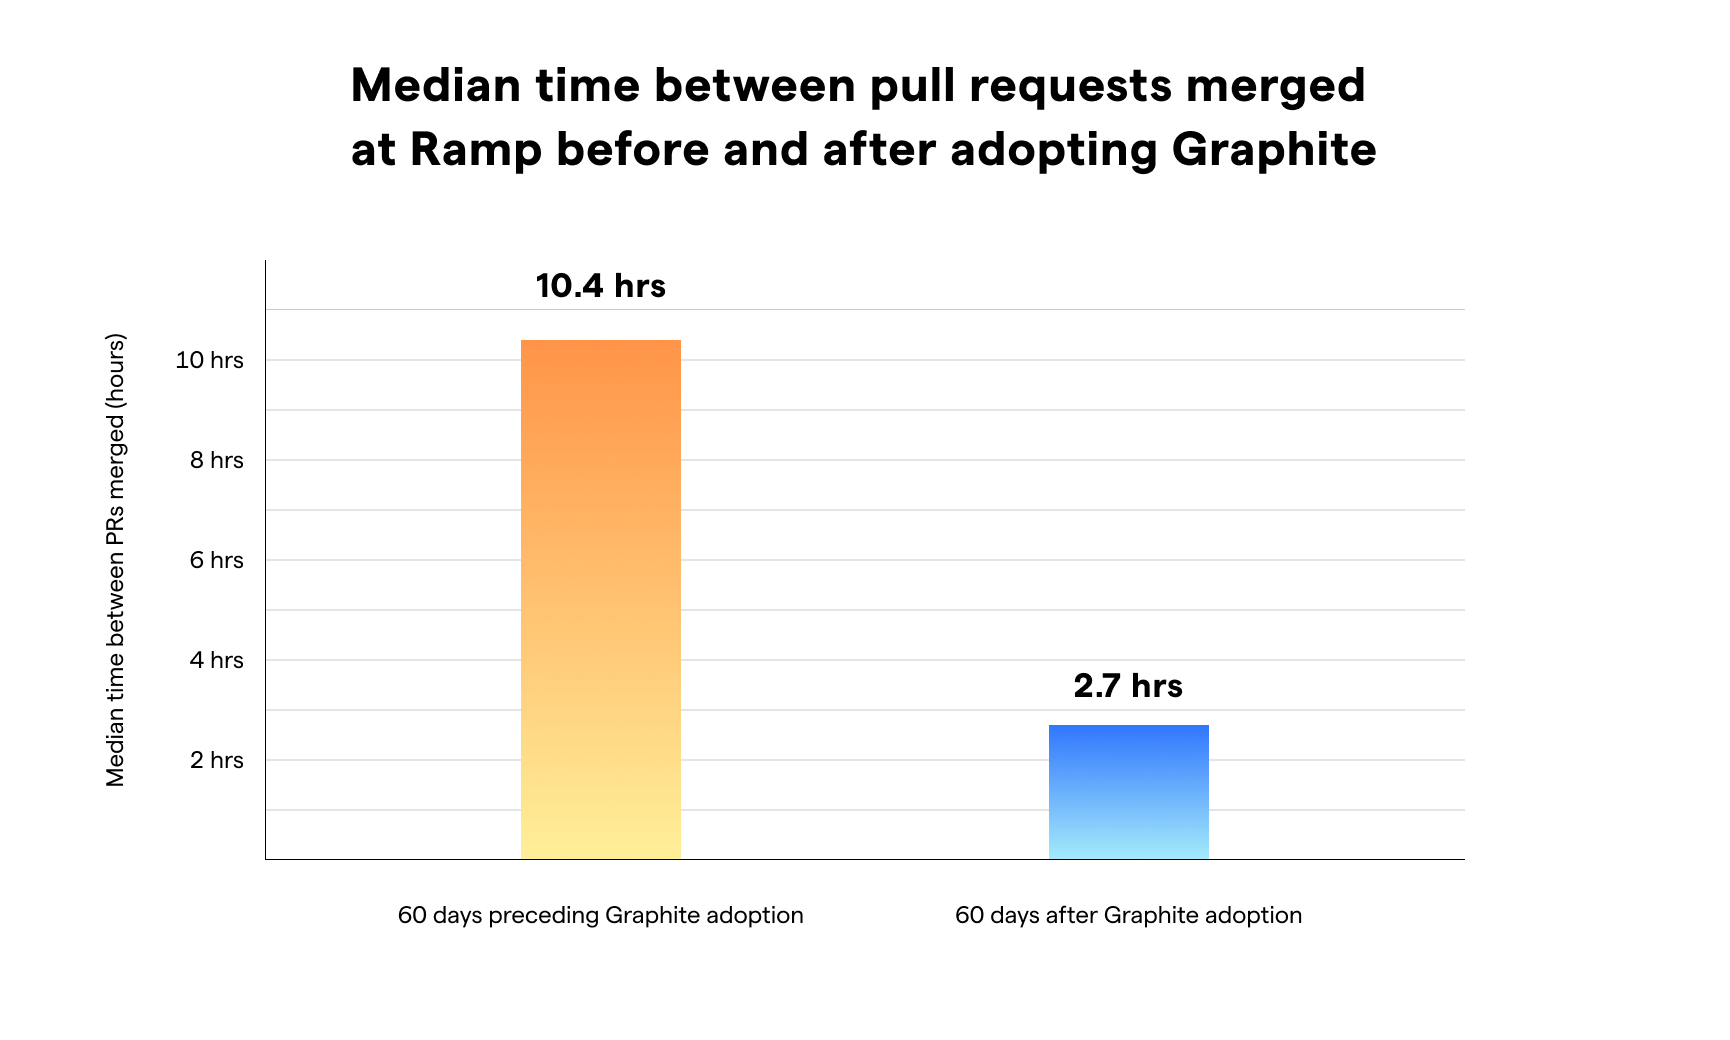 Median time between pull requests merged at Ramp before and after adopting Graphite